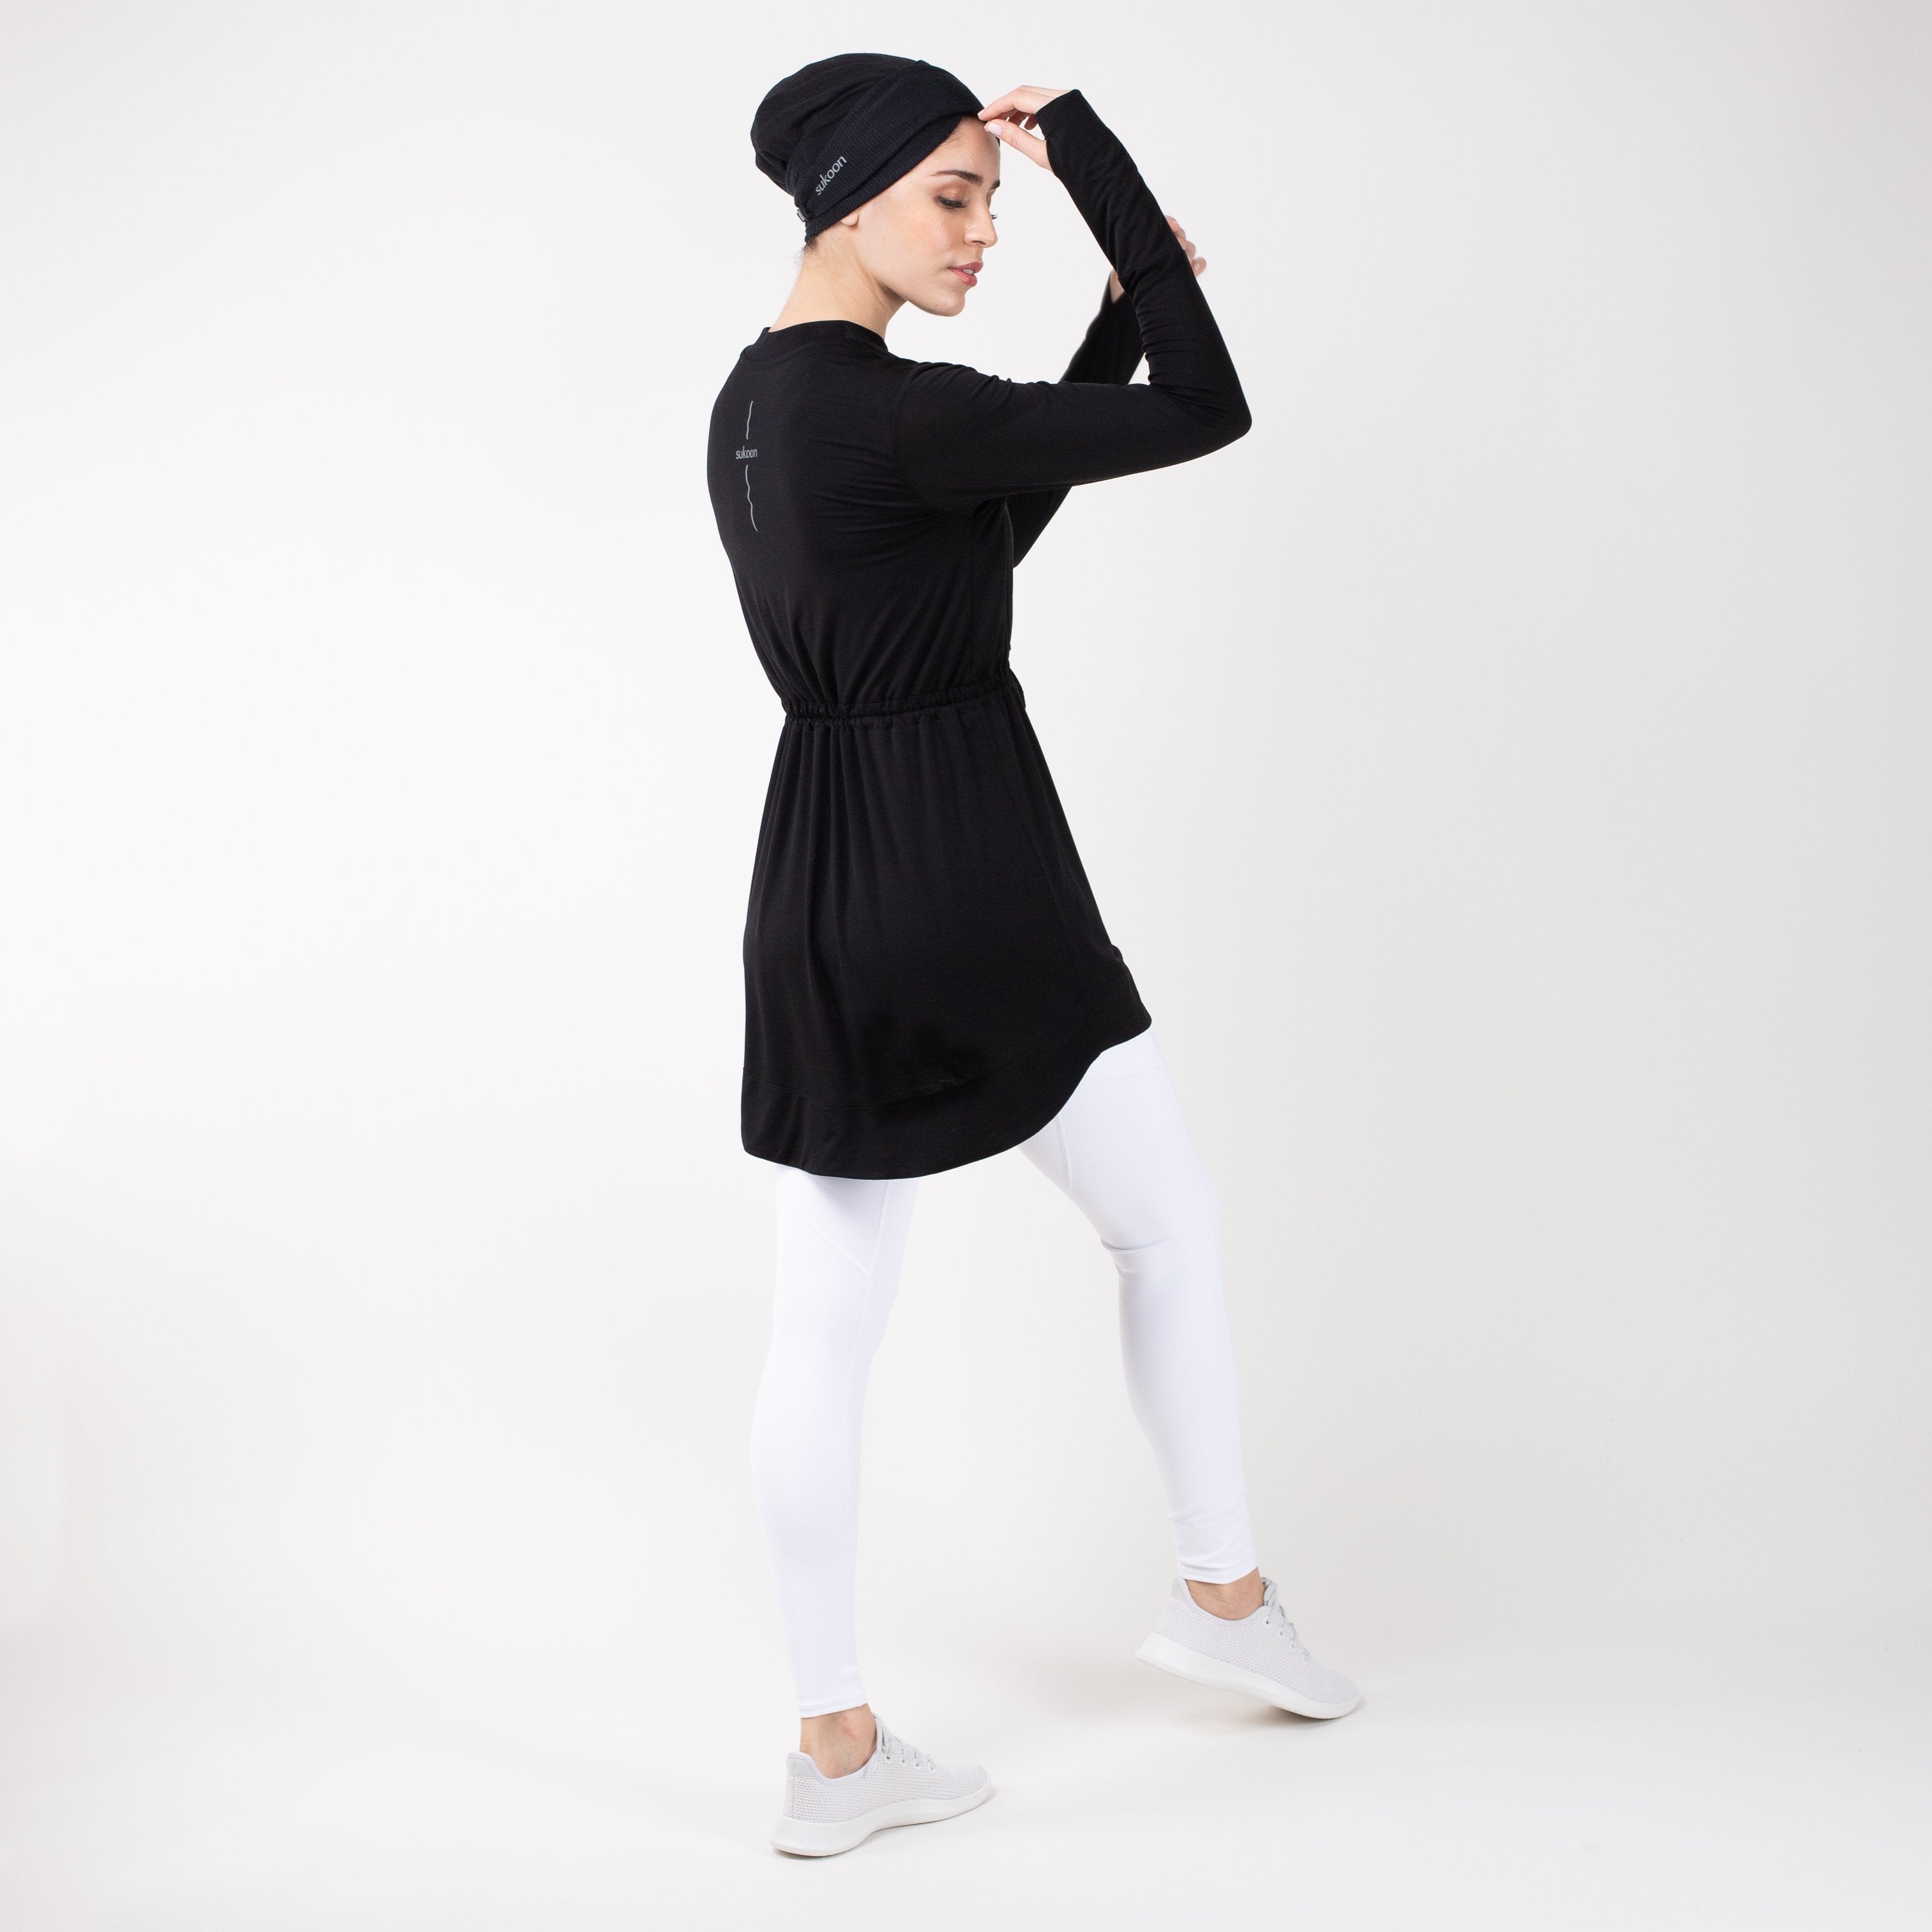 Back of woman in modest, black HAWA drawstring tee shirt and white leggings in front of a white backdrop.